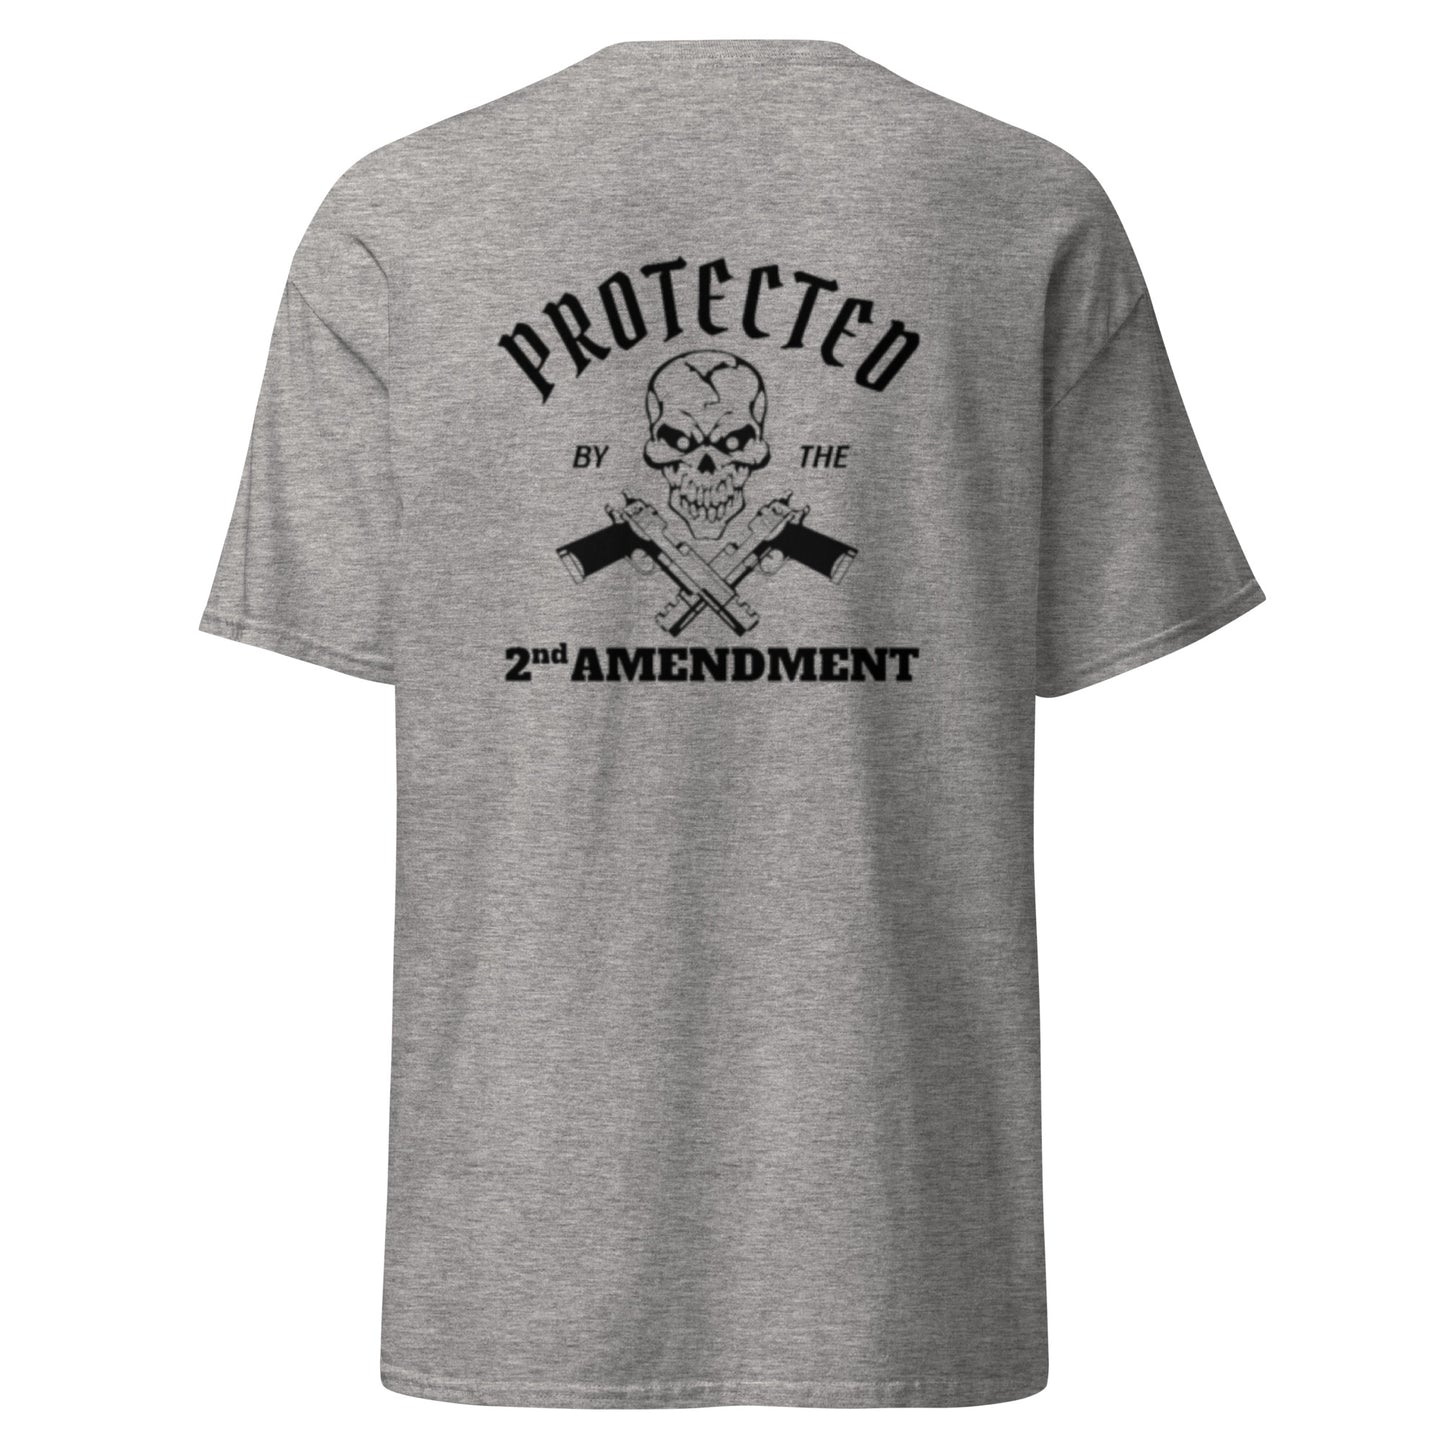 Men's classic tee - Protected by The 2nd Amendment - Cross Pistols / Skull